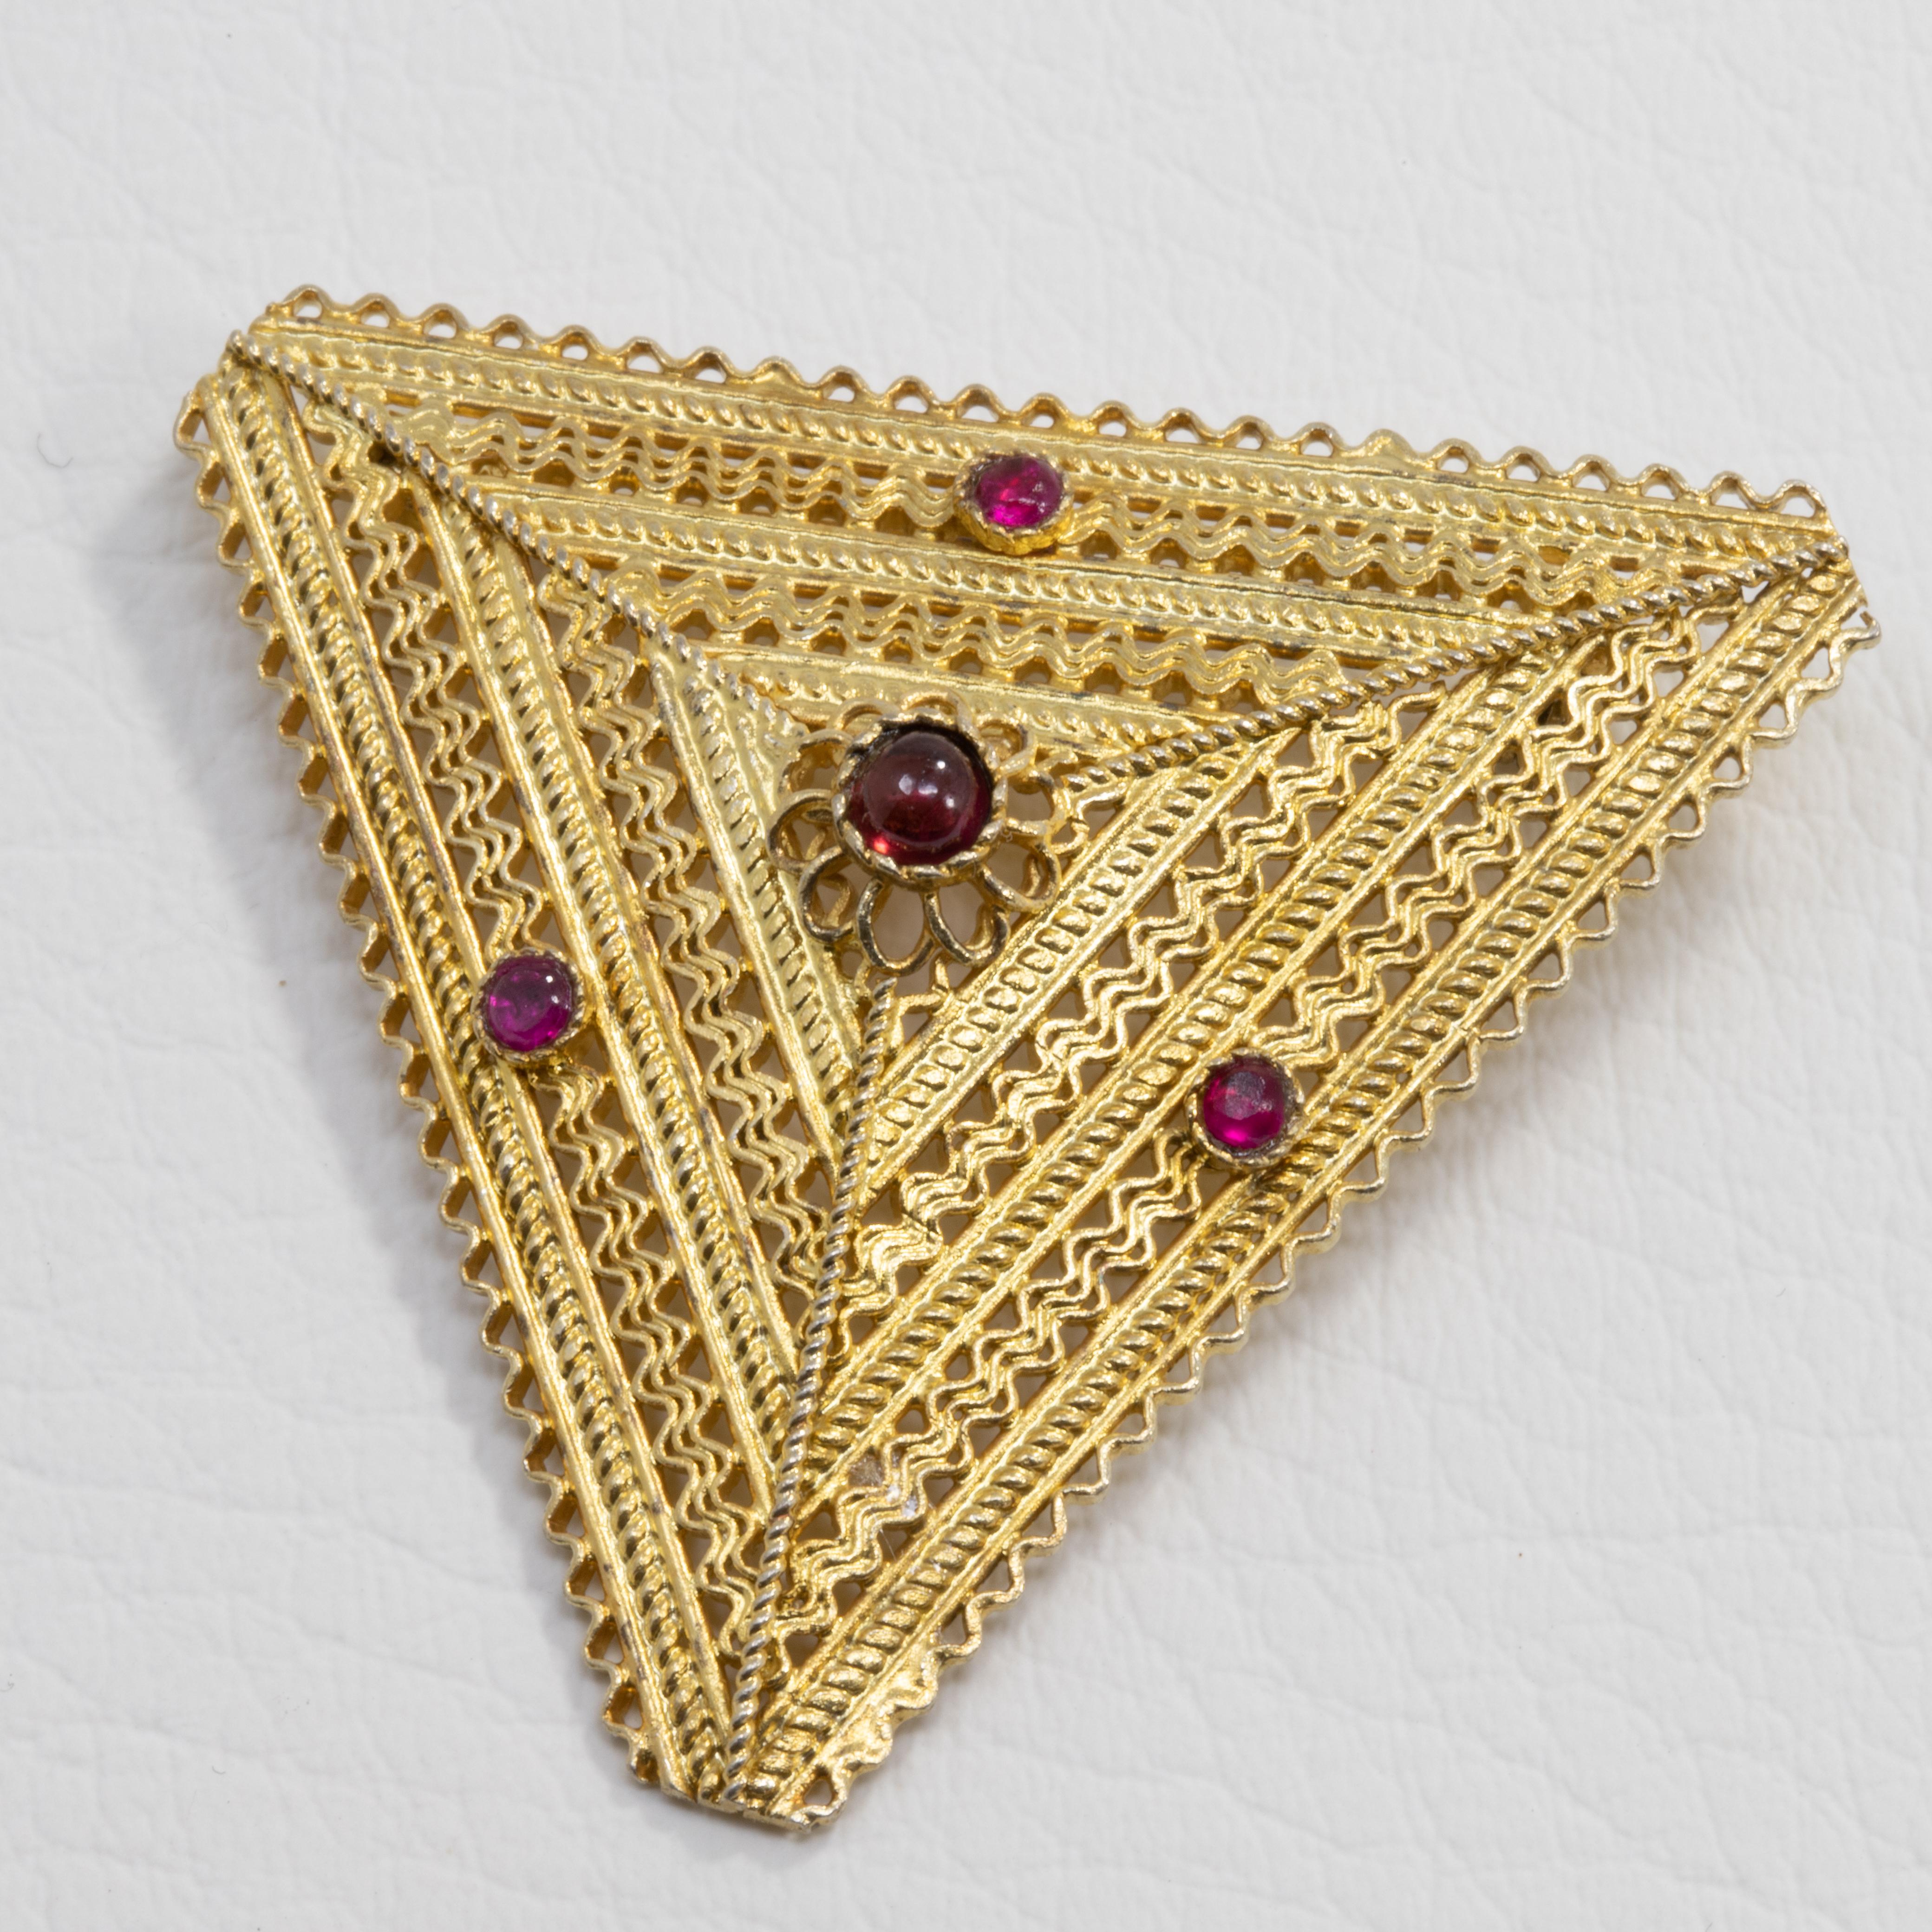 An exquisite brooch! Features a triangular, intricately accented, gold-plated metal setting with a centerpiece amethyst cabochon, which resembles a floral motif. Three faceted rubies, 2.3mm in diameter, are set around the center motif.

Light wear